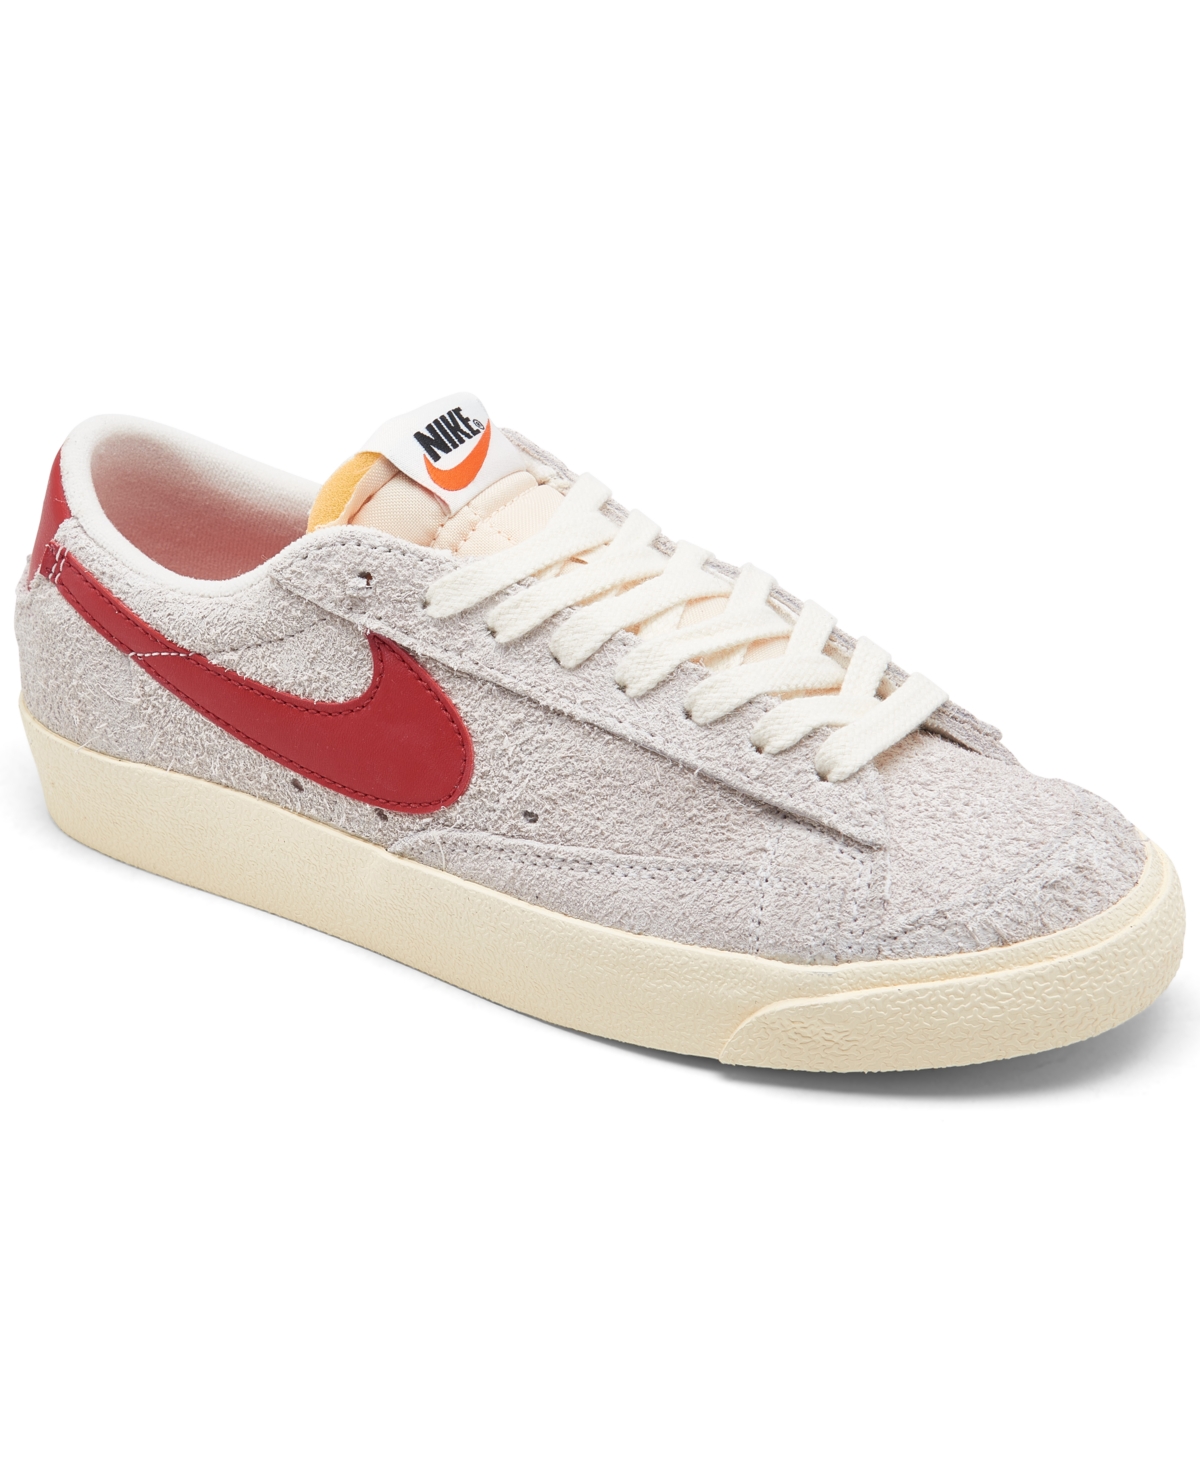 Women's Blazer Low '77 Vintage Suede Casual Sneakers from Finish Line - SUMMIT WHITE/GYM RED